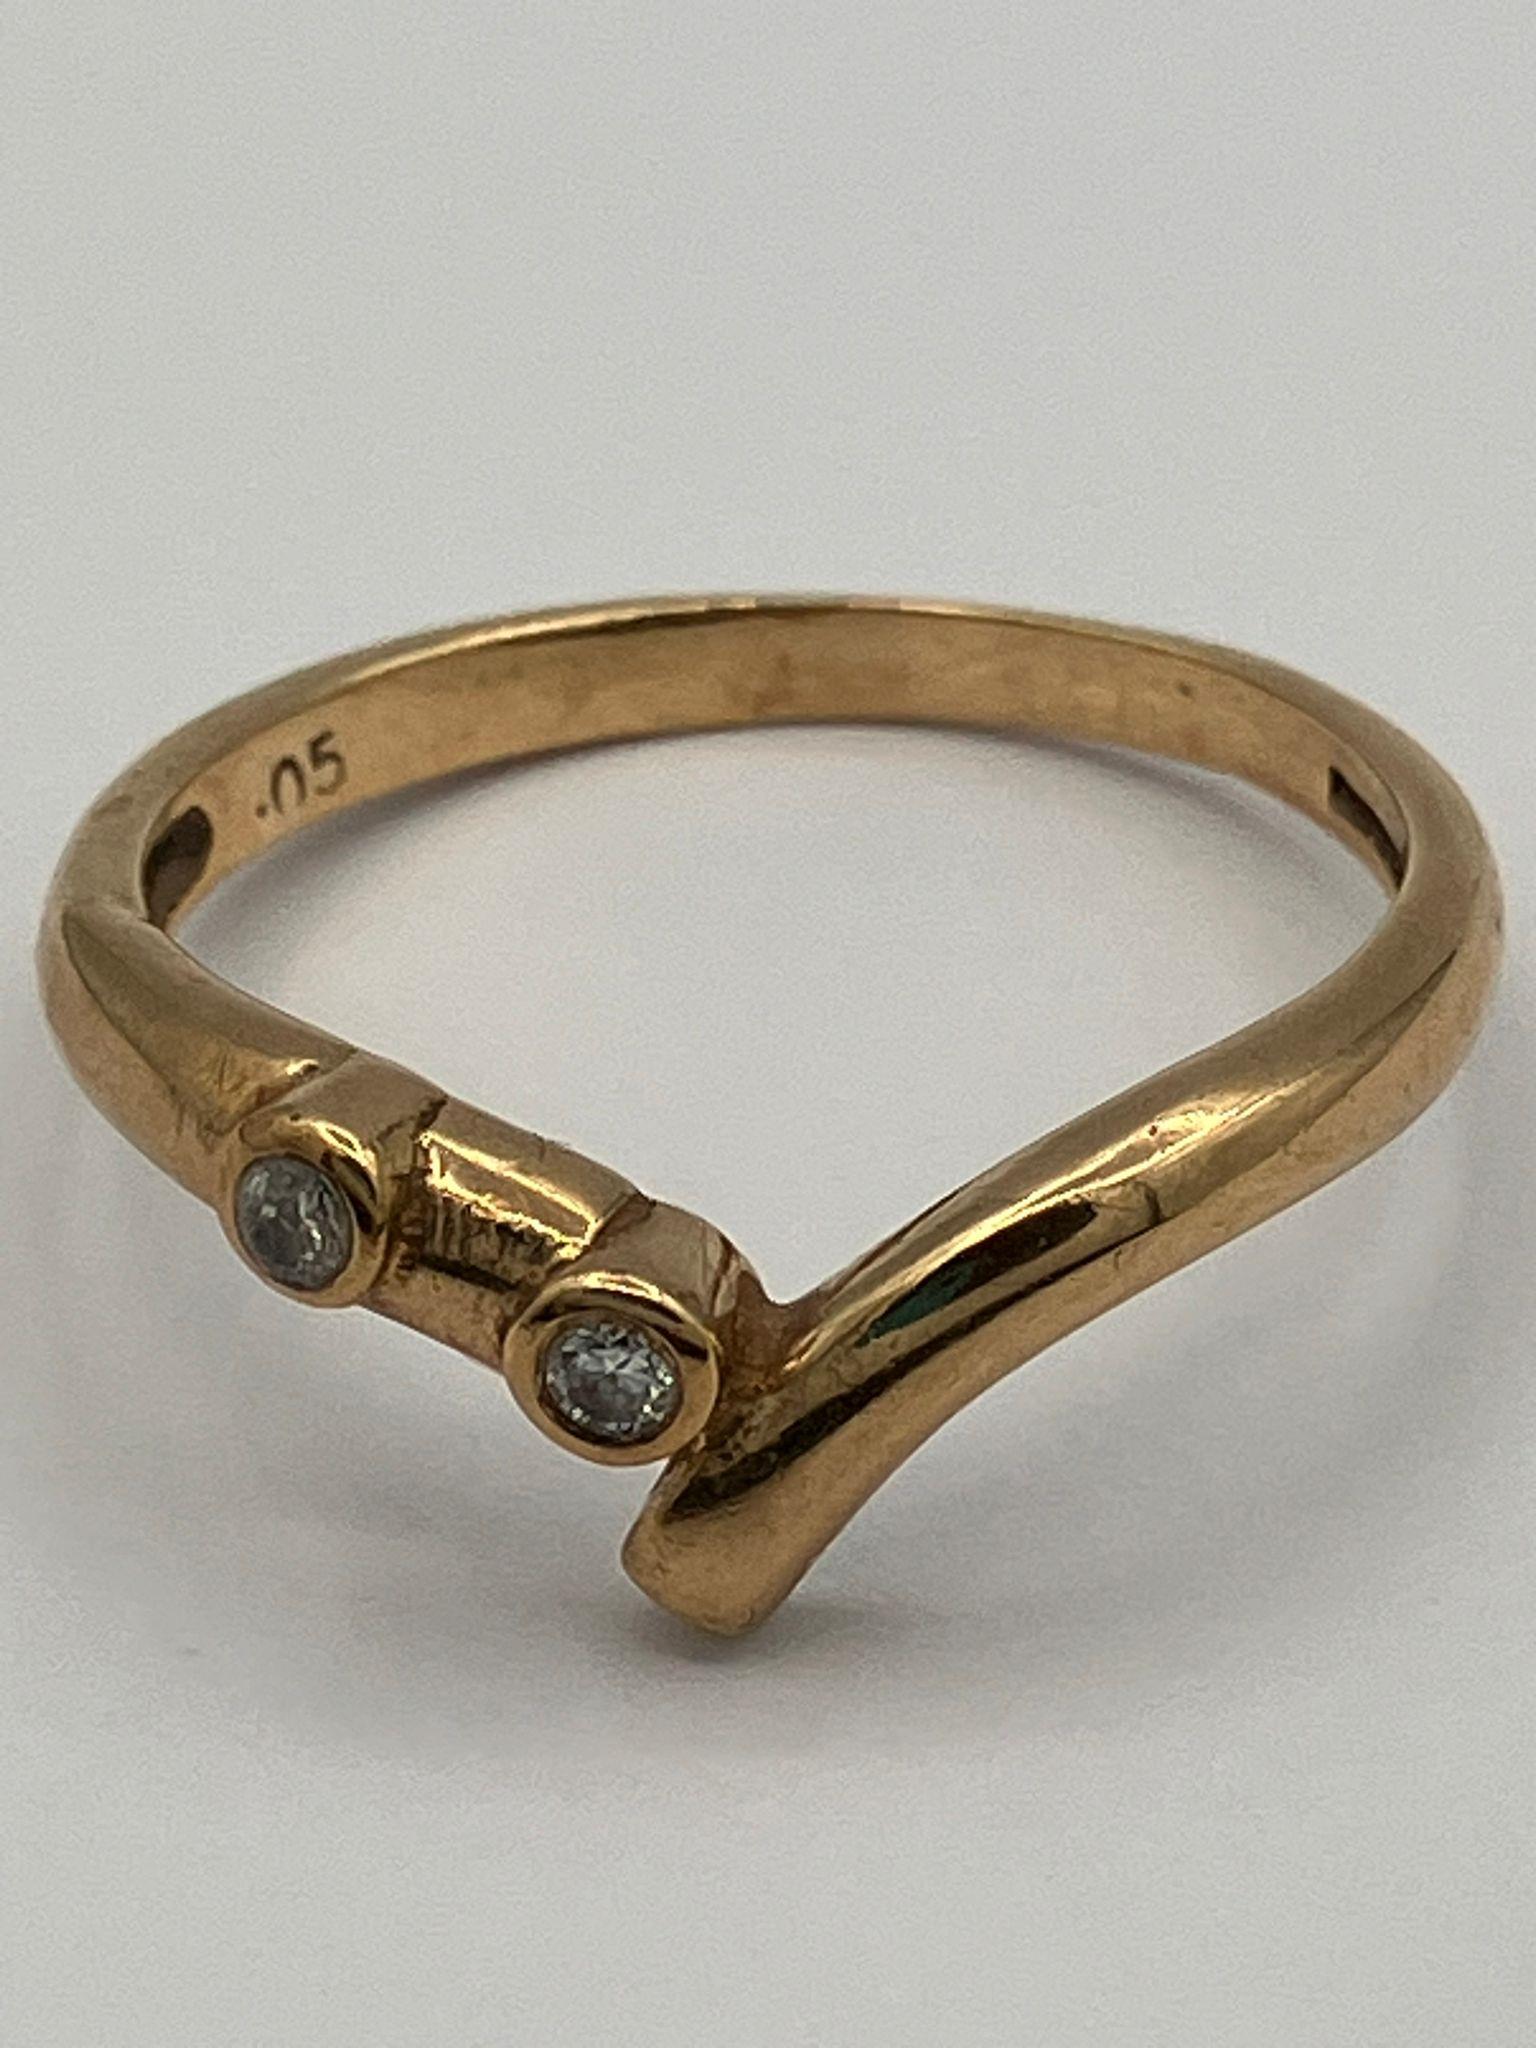 9 carat yellow GOLD and DIAMOND RING. A modernist version of the Classic WISHBONE RING set with 2